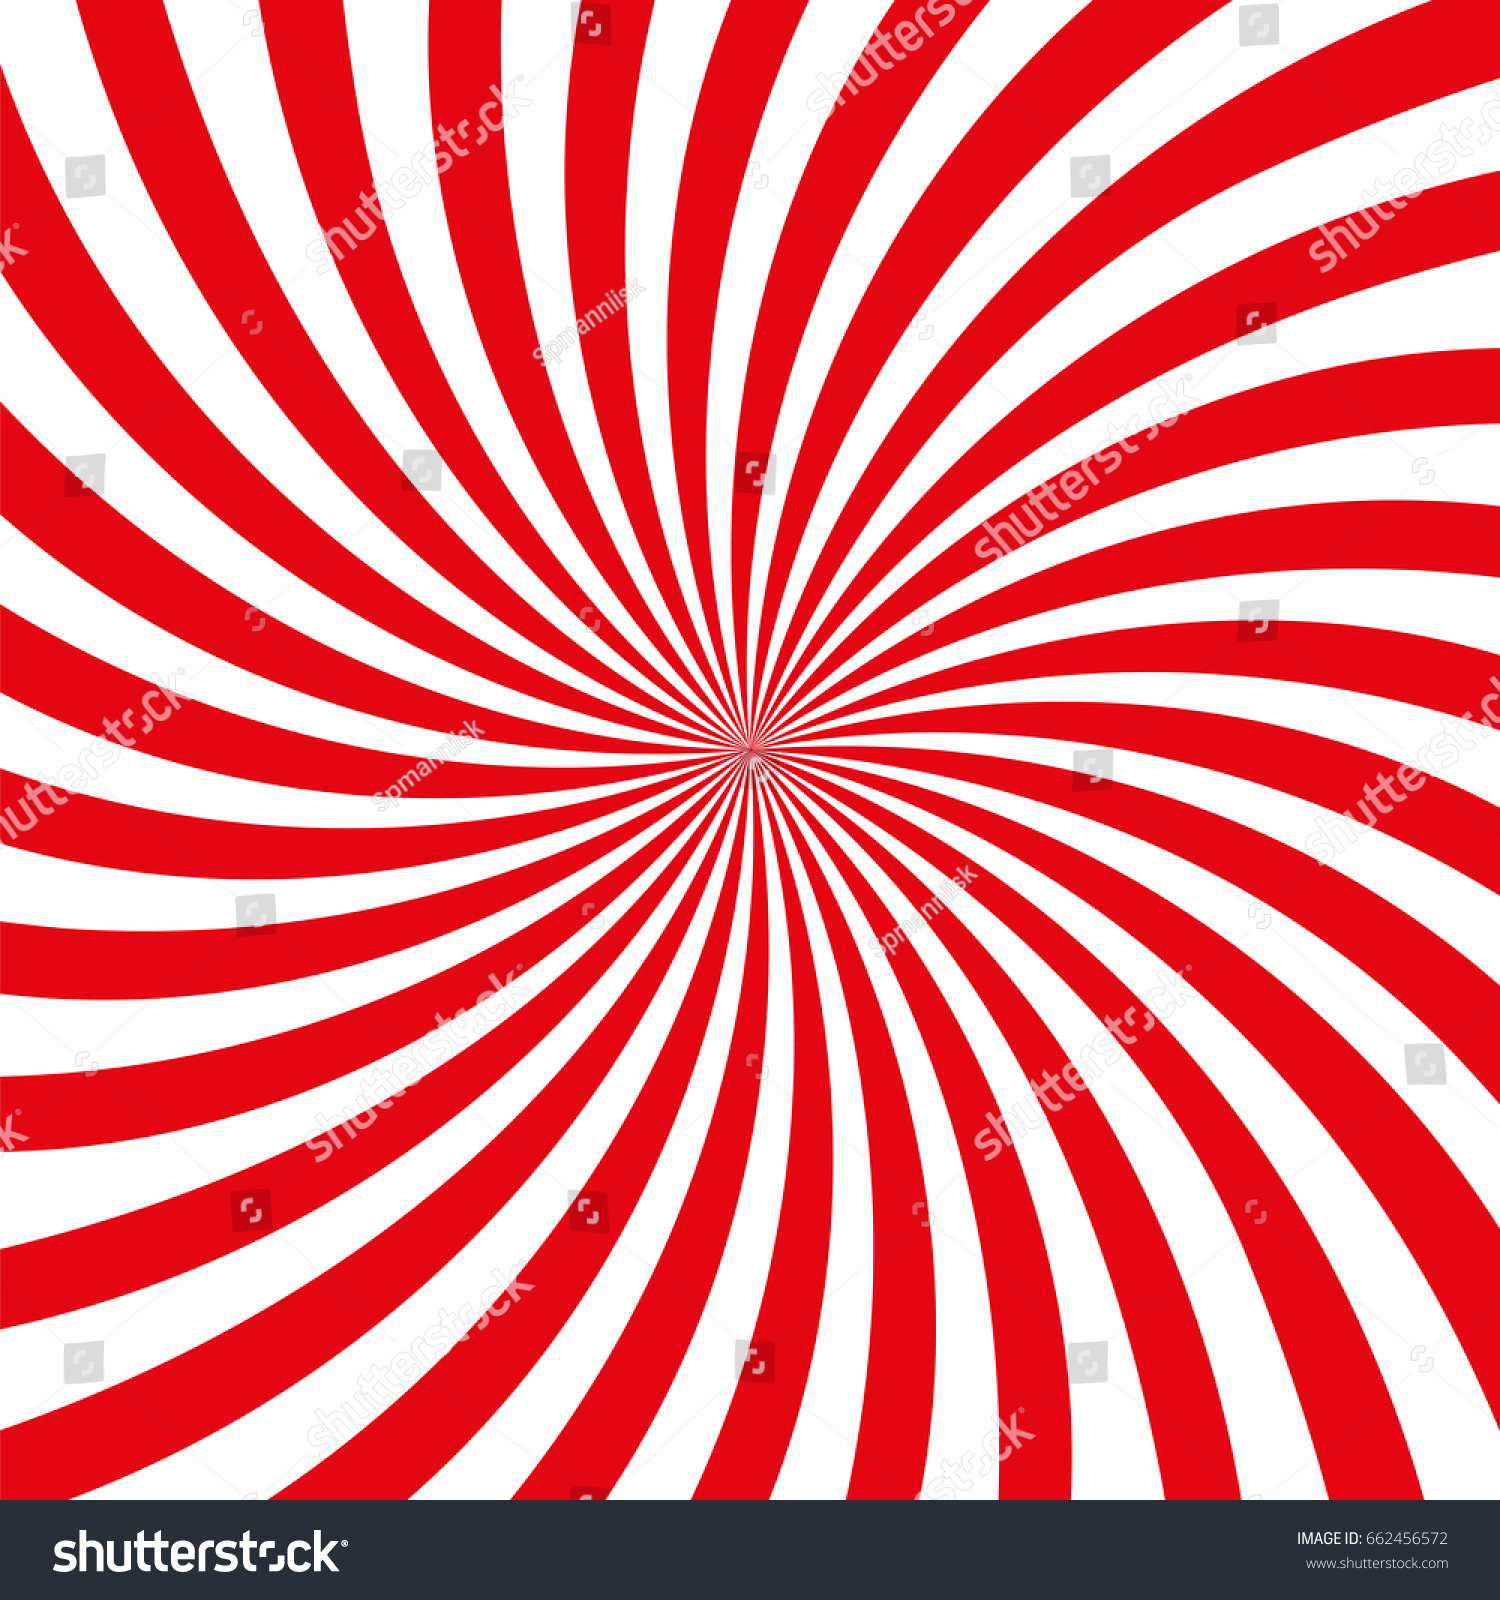 Vector Image Red White Striped Background Stock Vector 662456572